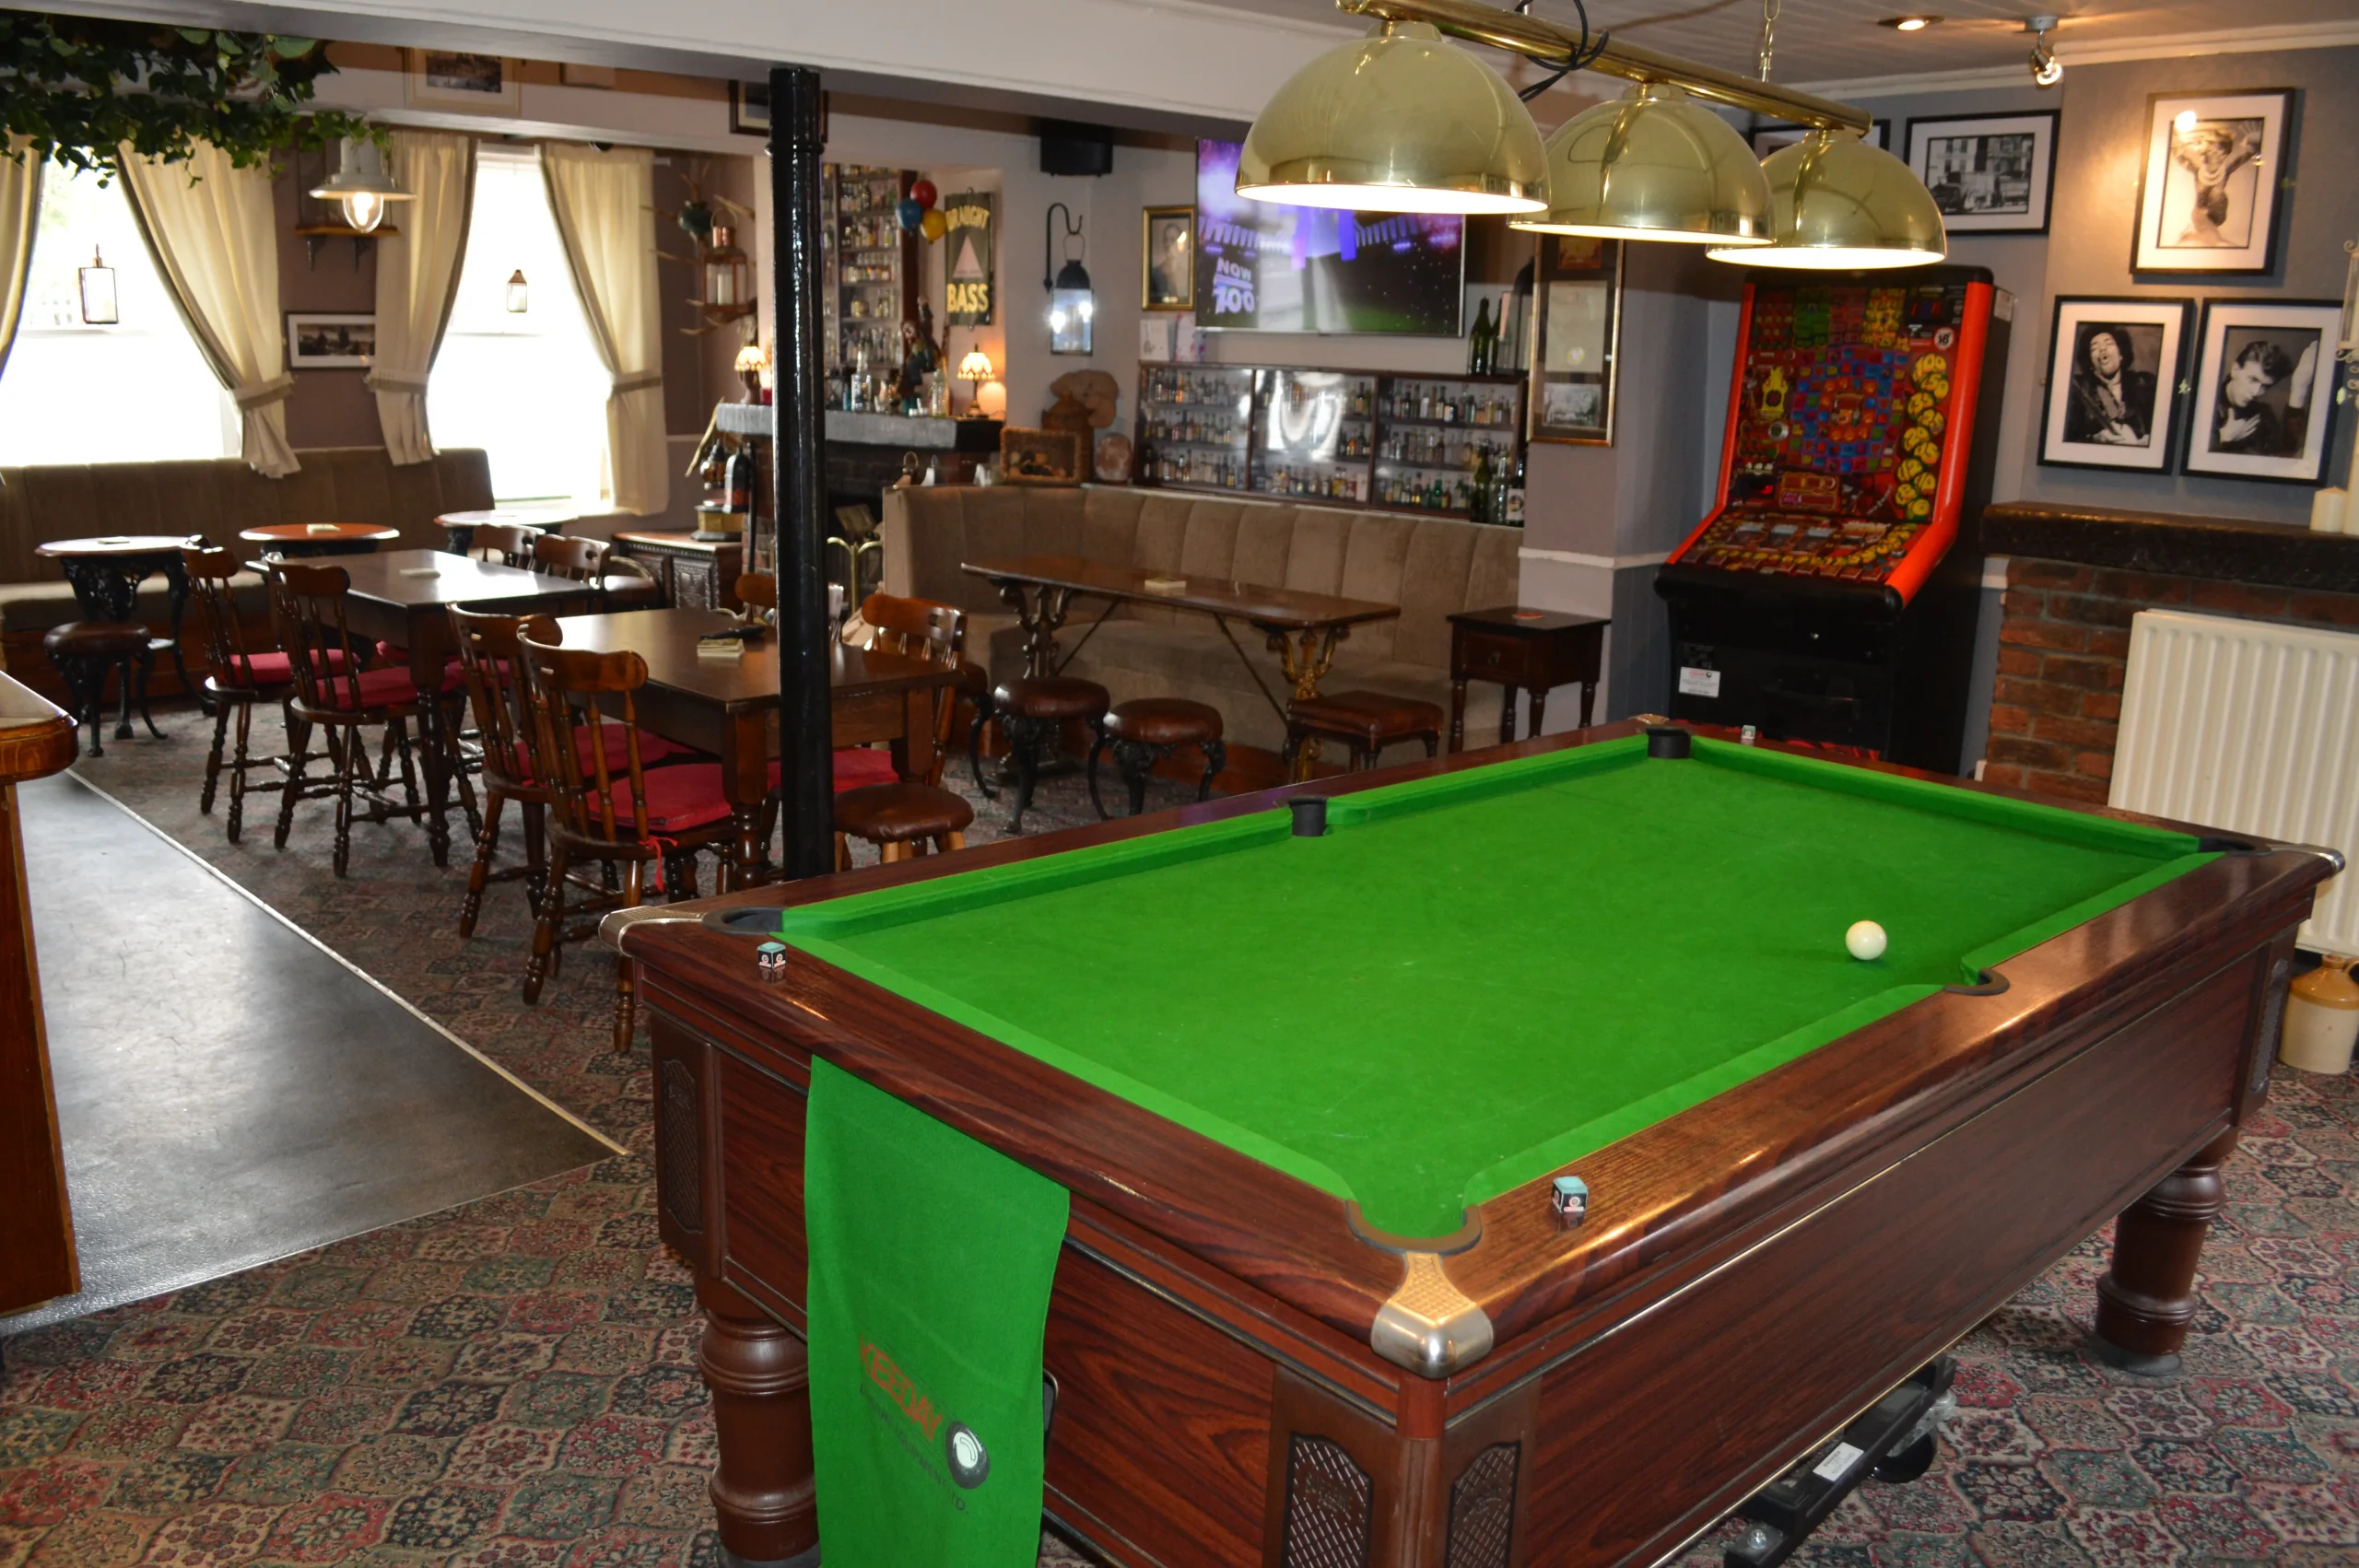 Coach and Horses Boston, Lincolnshire - Pool Table